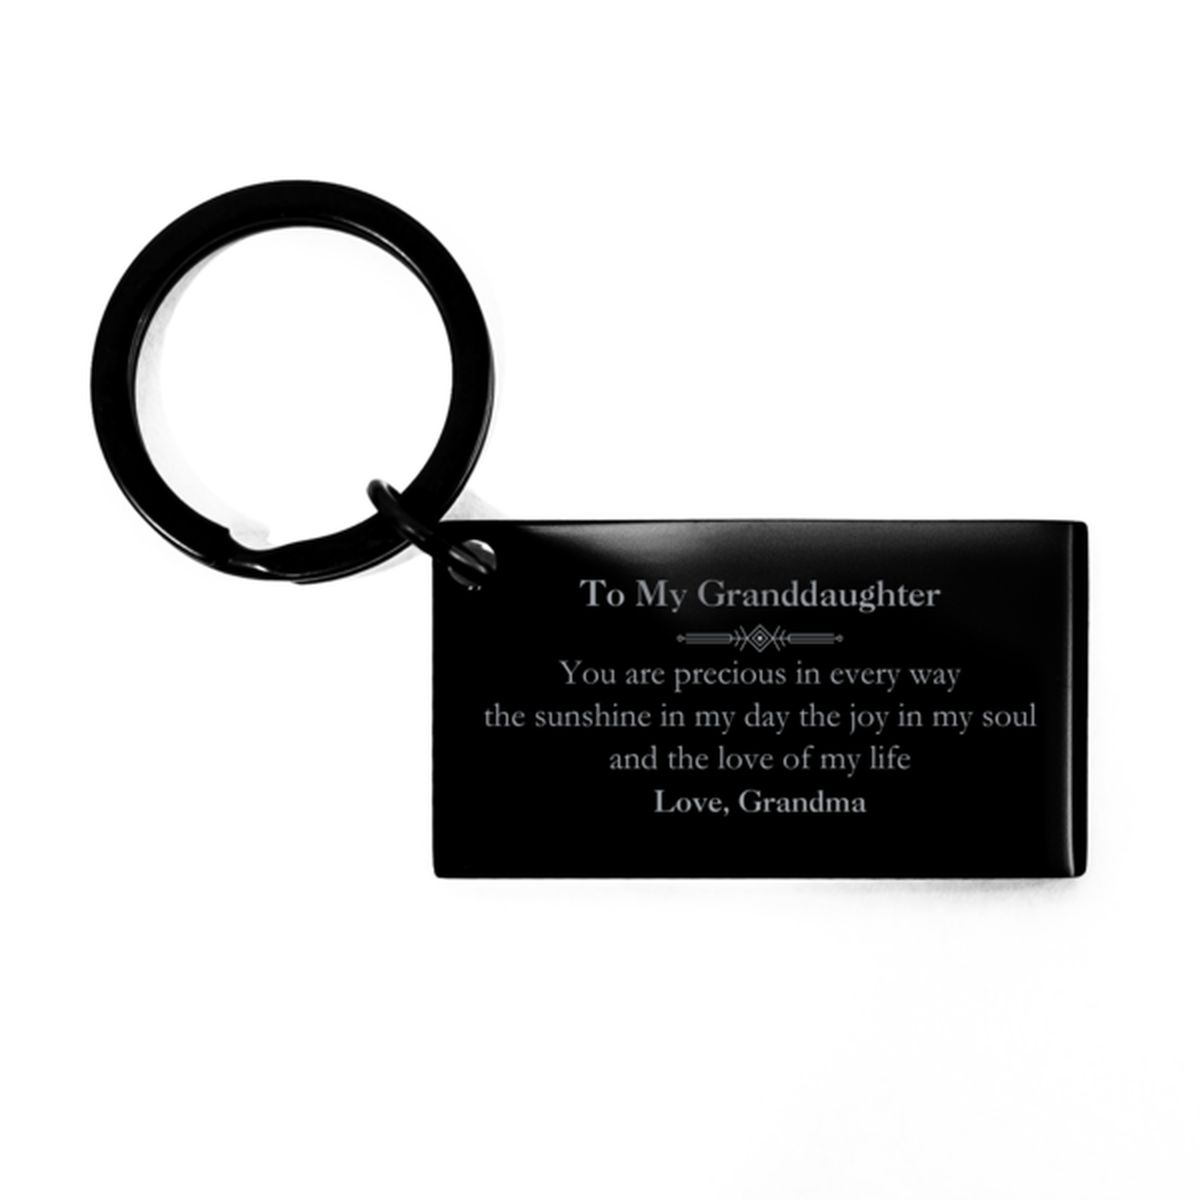 Graduation Gifts for Granddaughter Keychain Present from Grandma, Christmas Granddaughter Birthday Gifts Granddaughter You are precious in every way the sunshine in my day. Love, Grandma